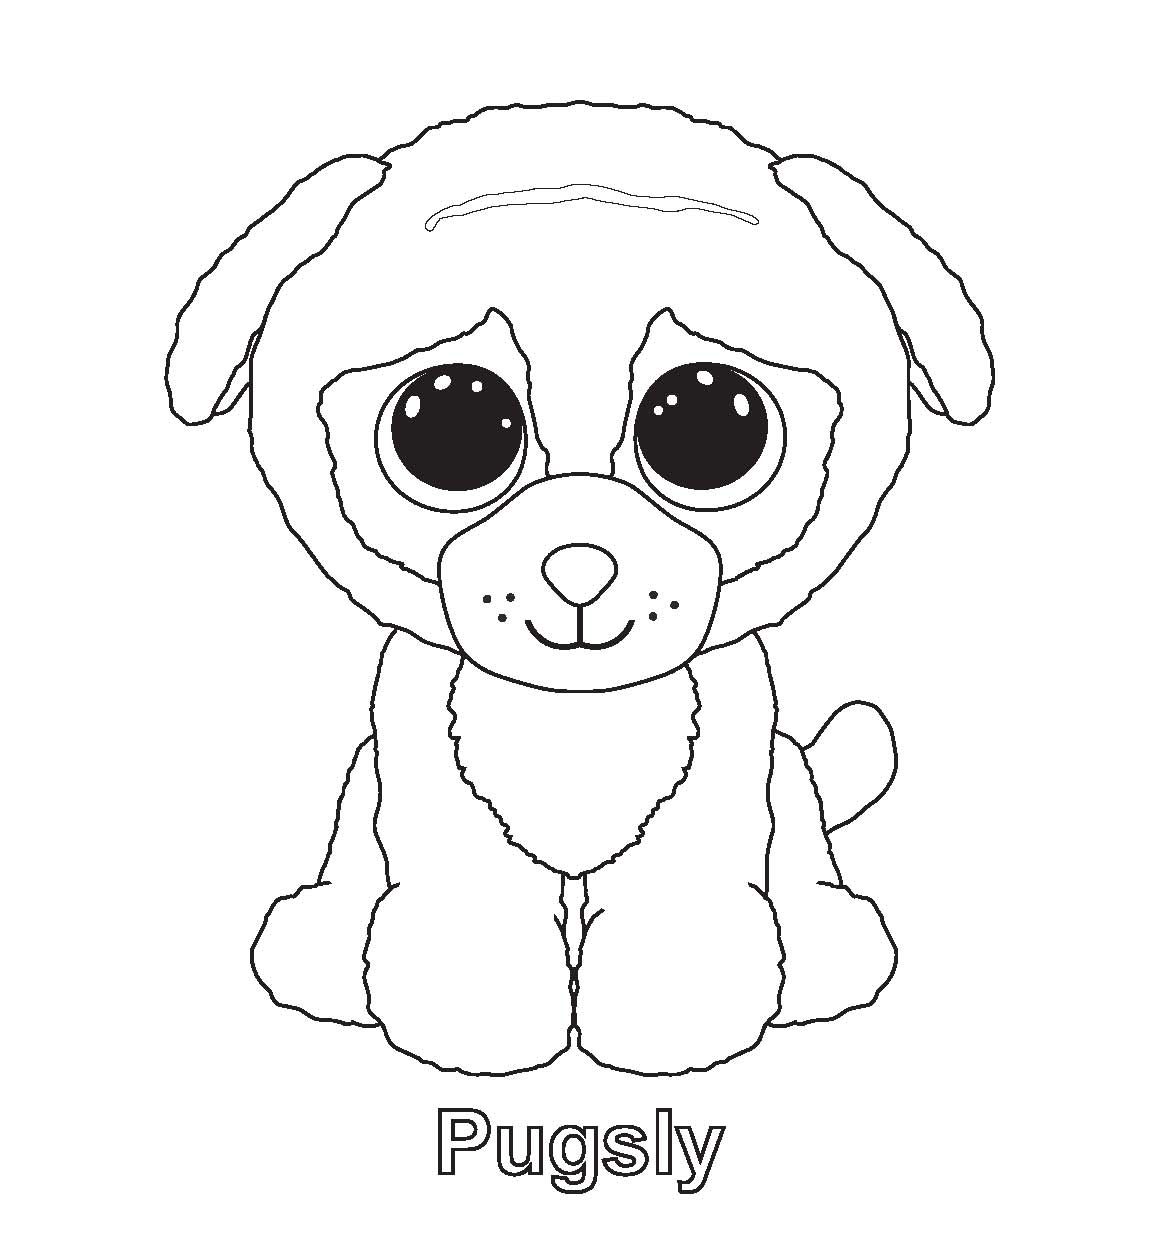 Pugsly - Beanie Boo Coloring Pages